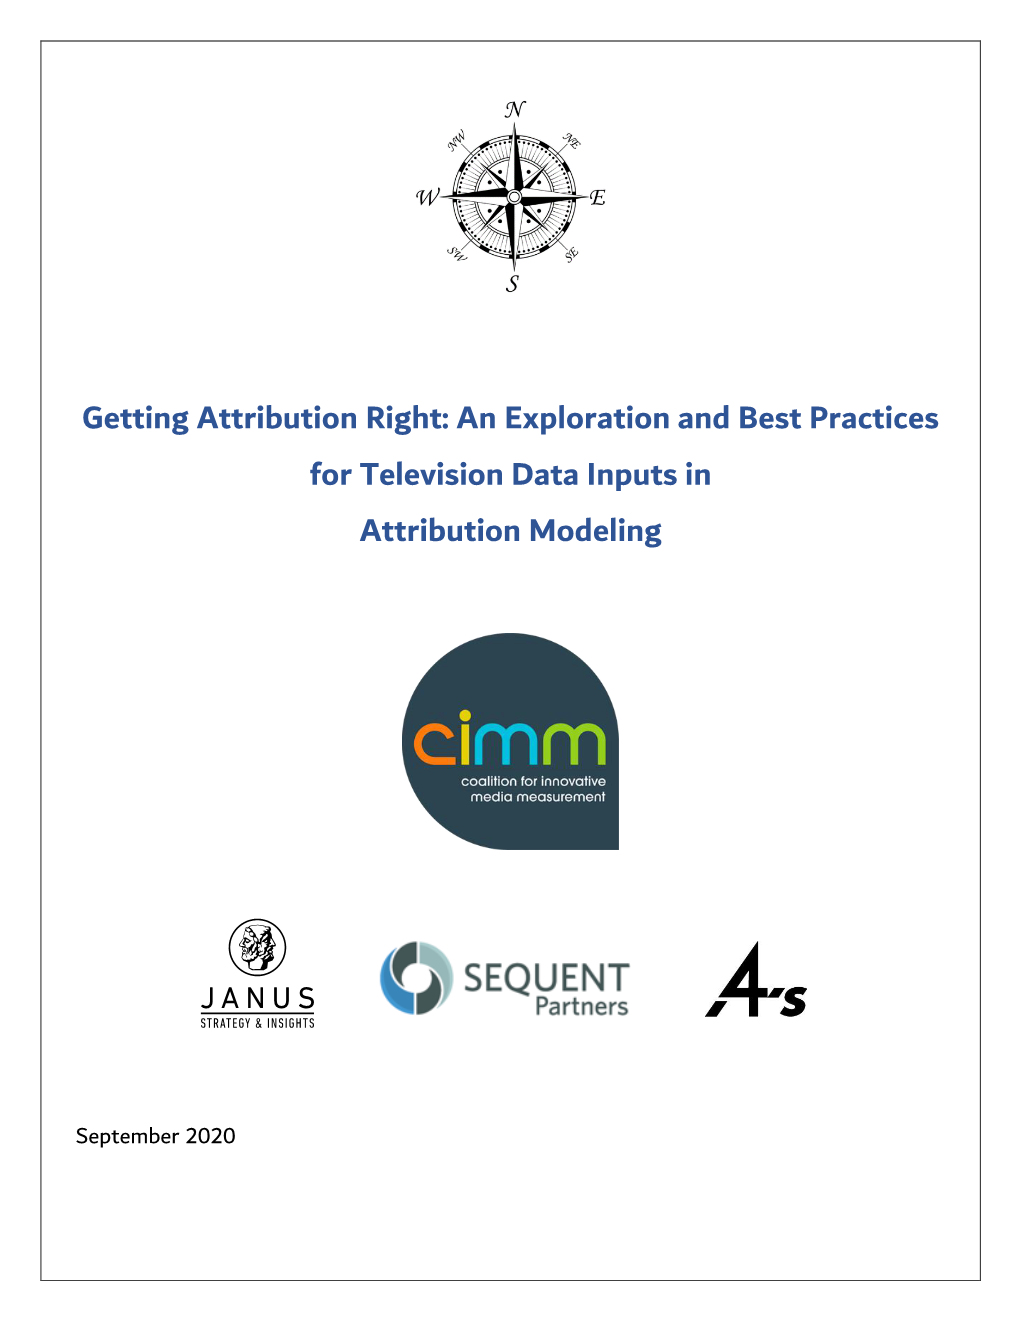 An Exploration and Best Practices for Television Data Inputs in Attribution Modeling